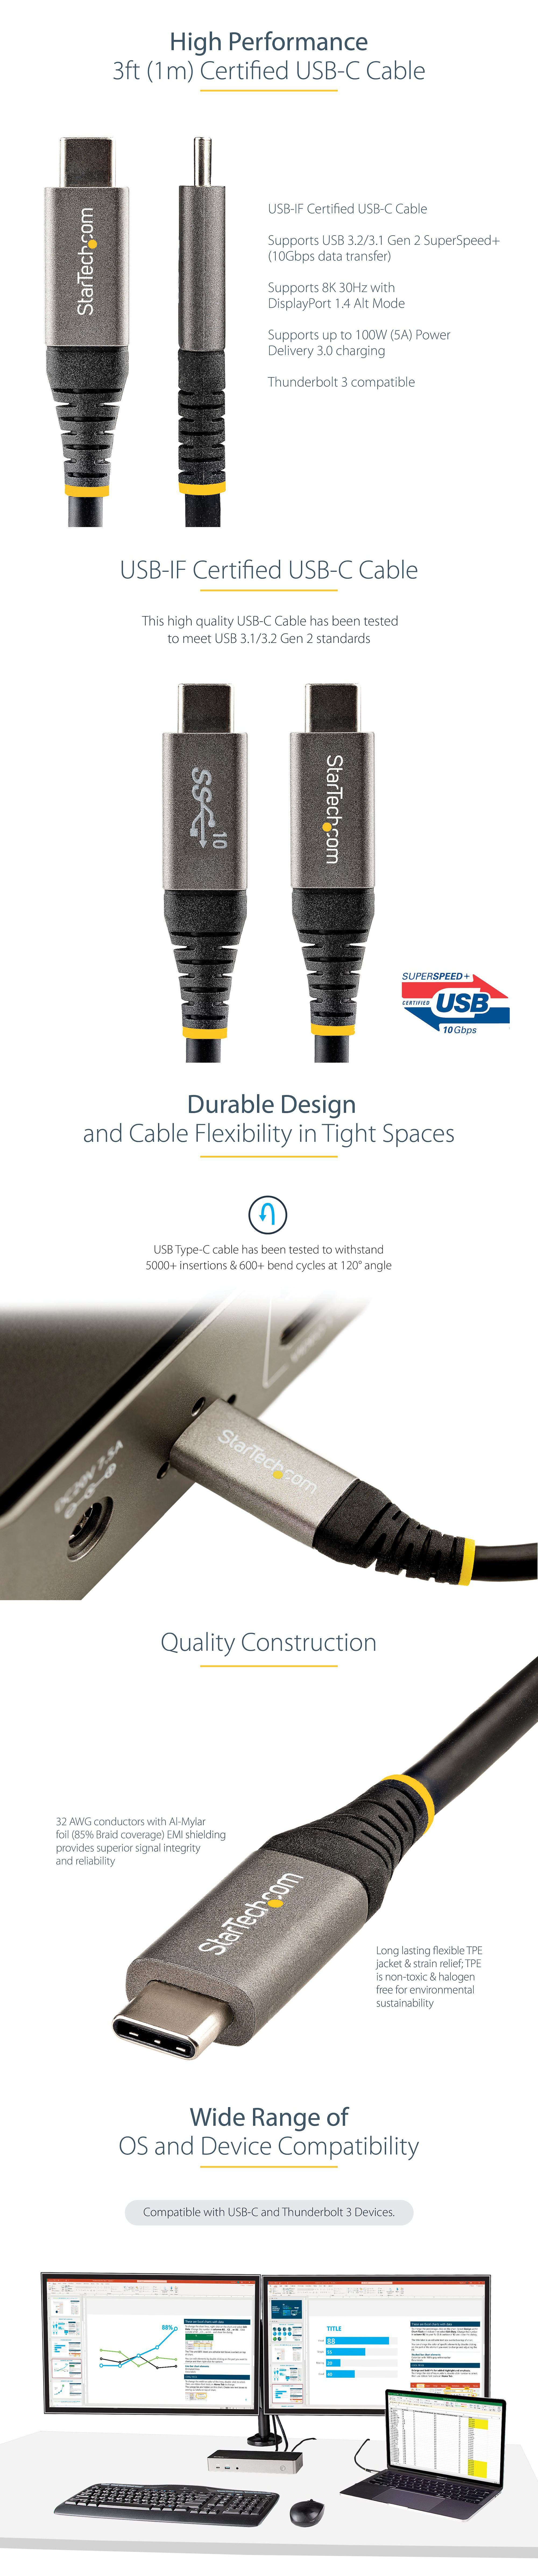 USB-Cables-StarTech-USB-C-3-2-to-USB-C-3-2-Cable-w-100W-5A-PD-1m-1